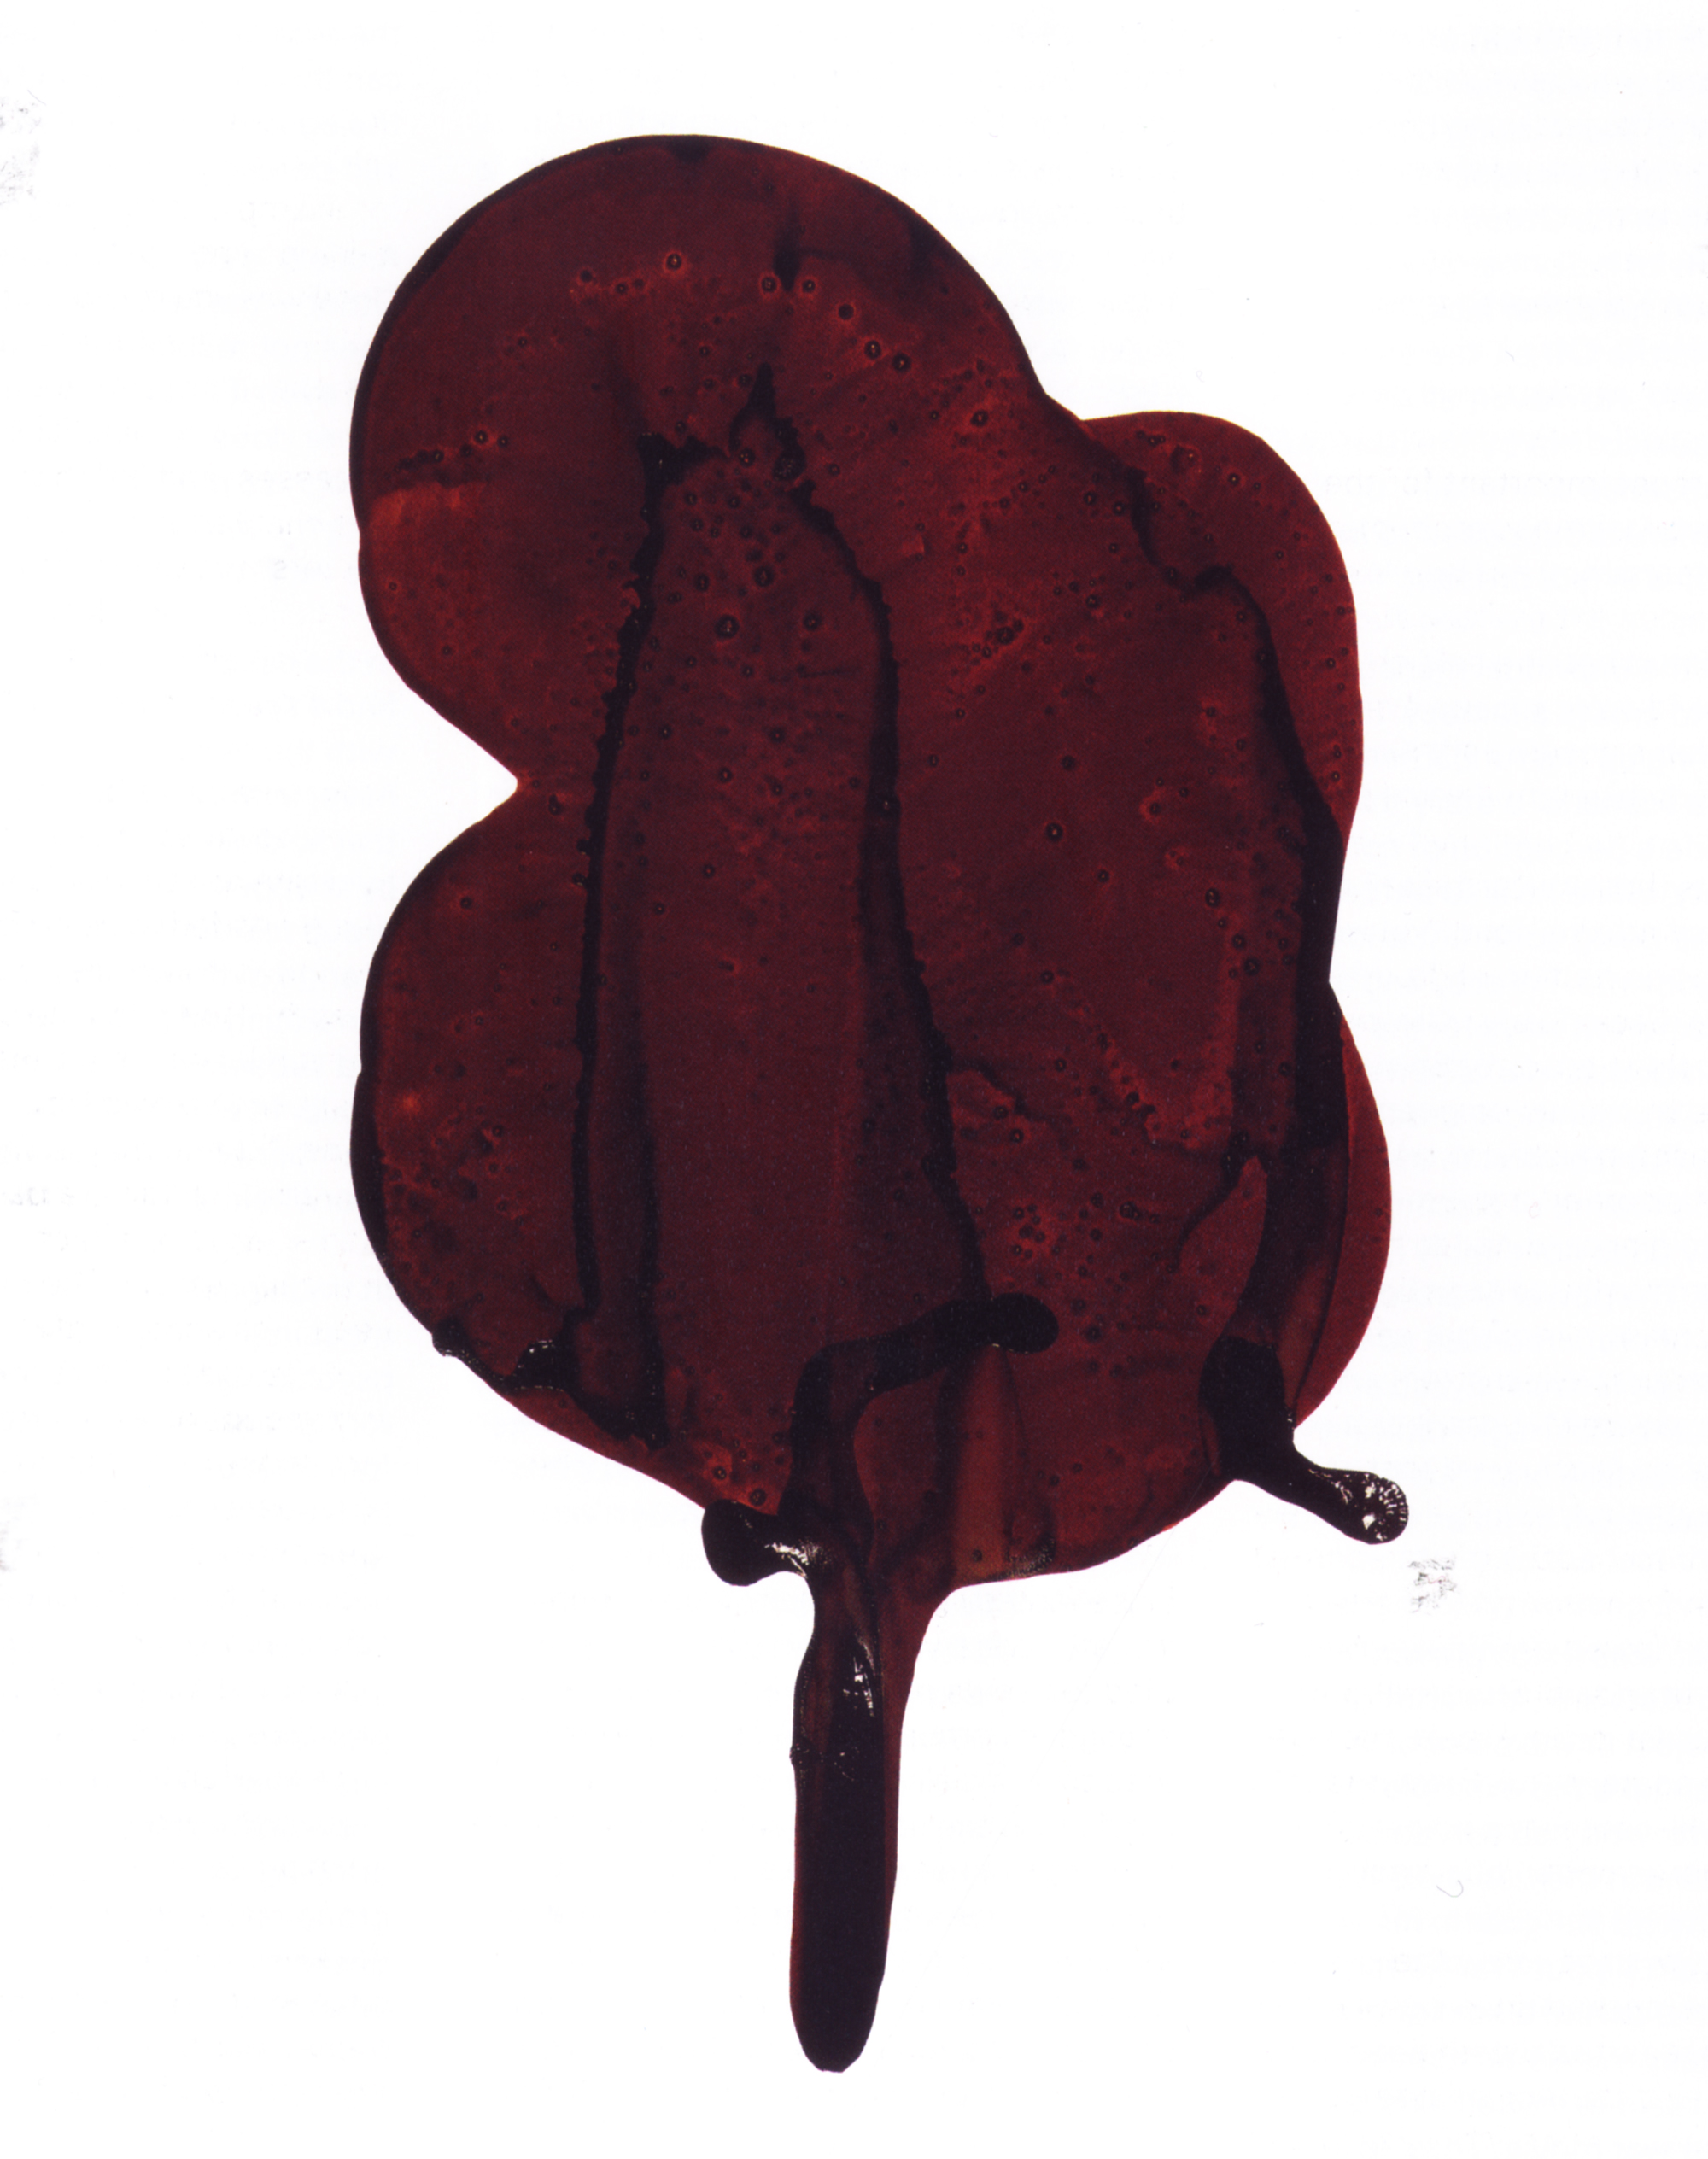 A 1999 work by artist Peter Lew entitled “Untitled #23 (Pig Blood Series).”